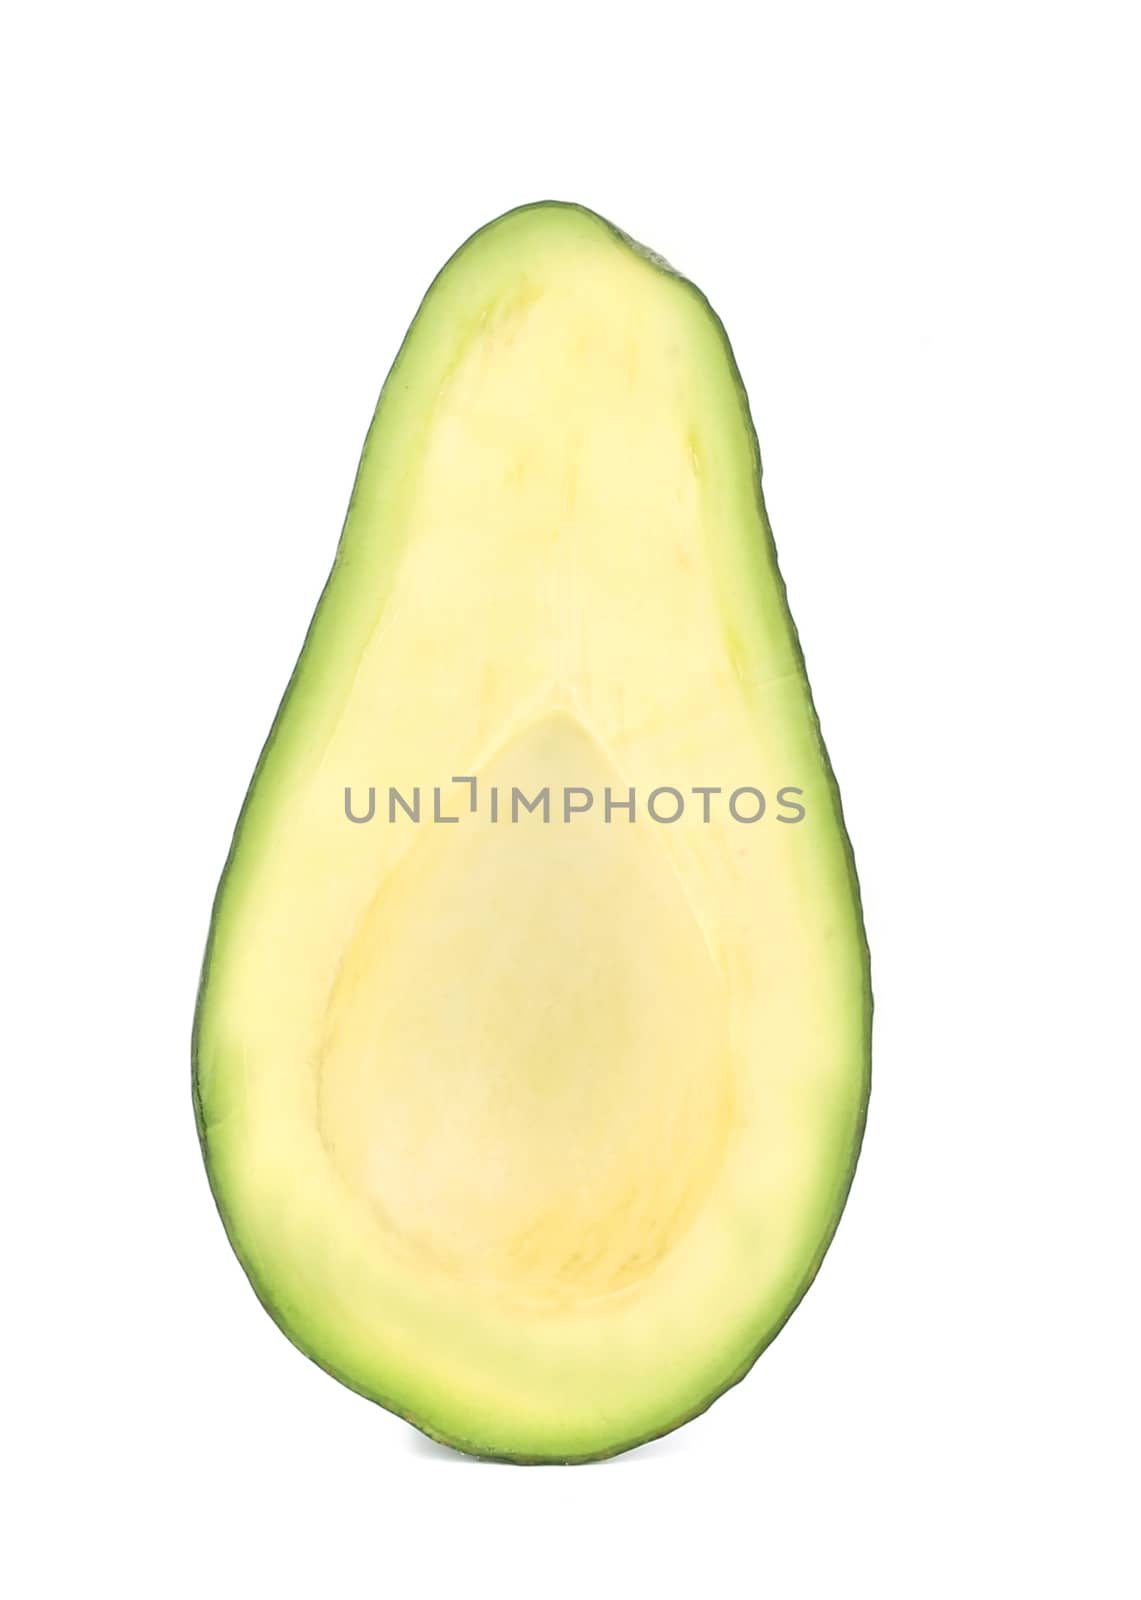 Sliced ripe avocado. Isolated on a white background.